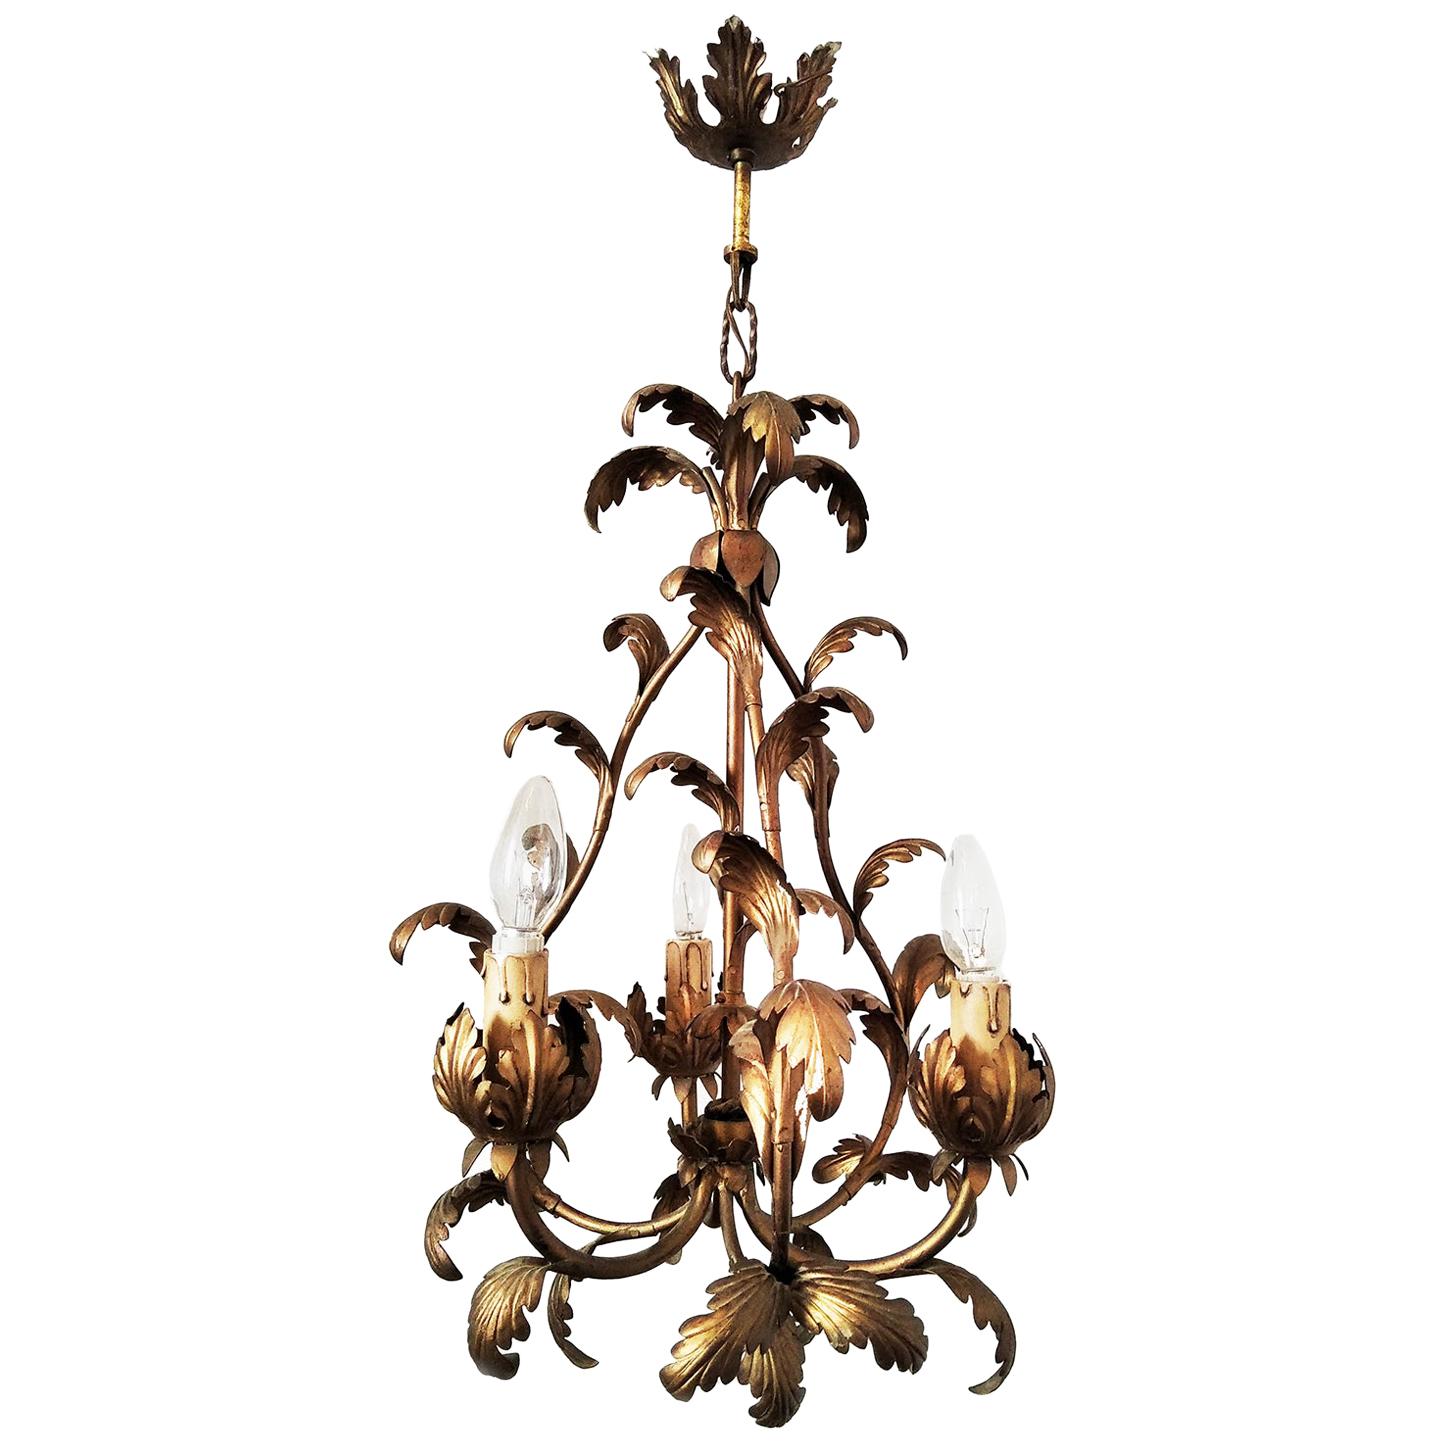 Midcentury Chandelier or Pendant Leaves Wrought Iron, Spain, 1950s